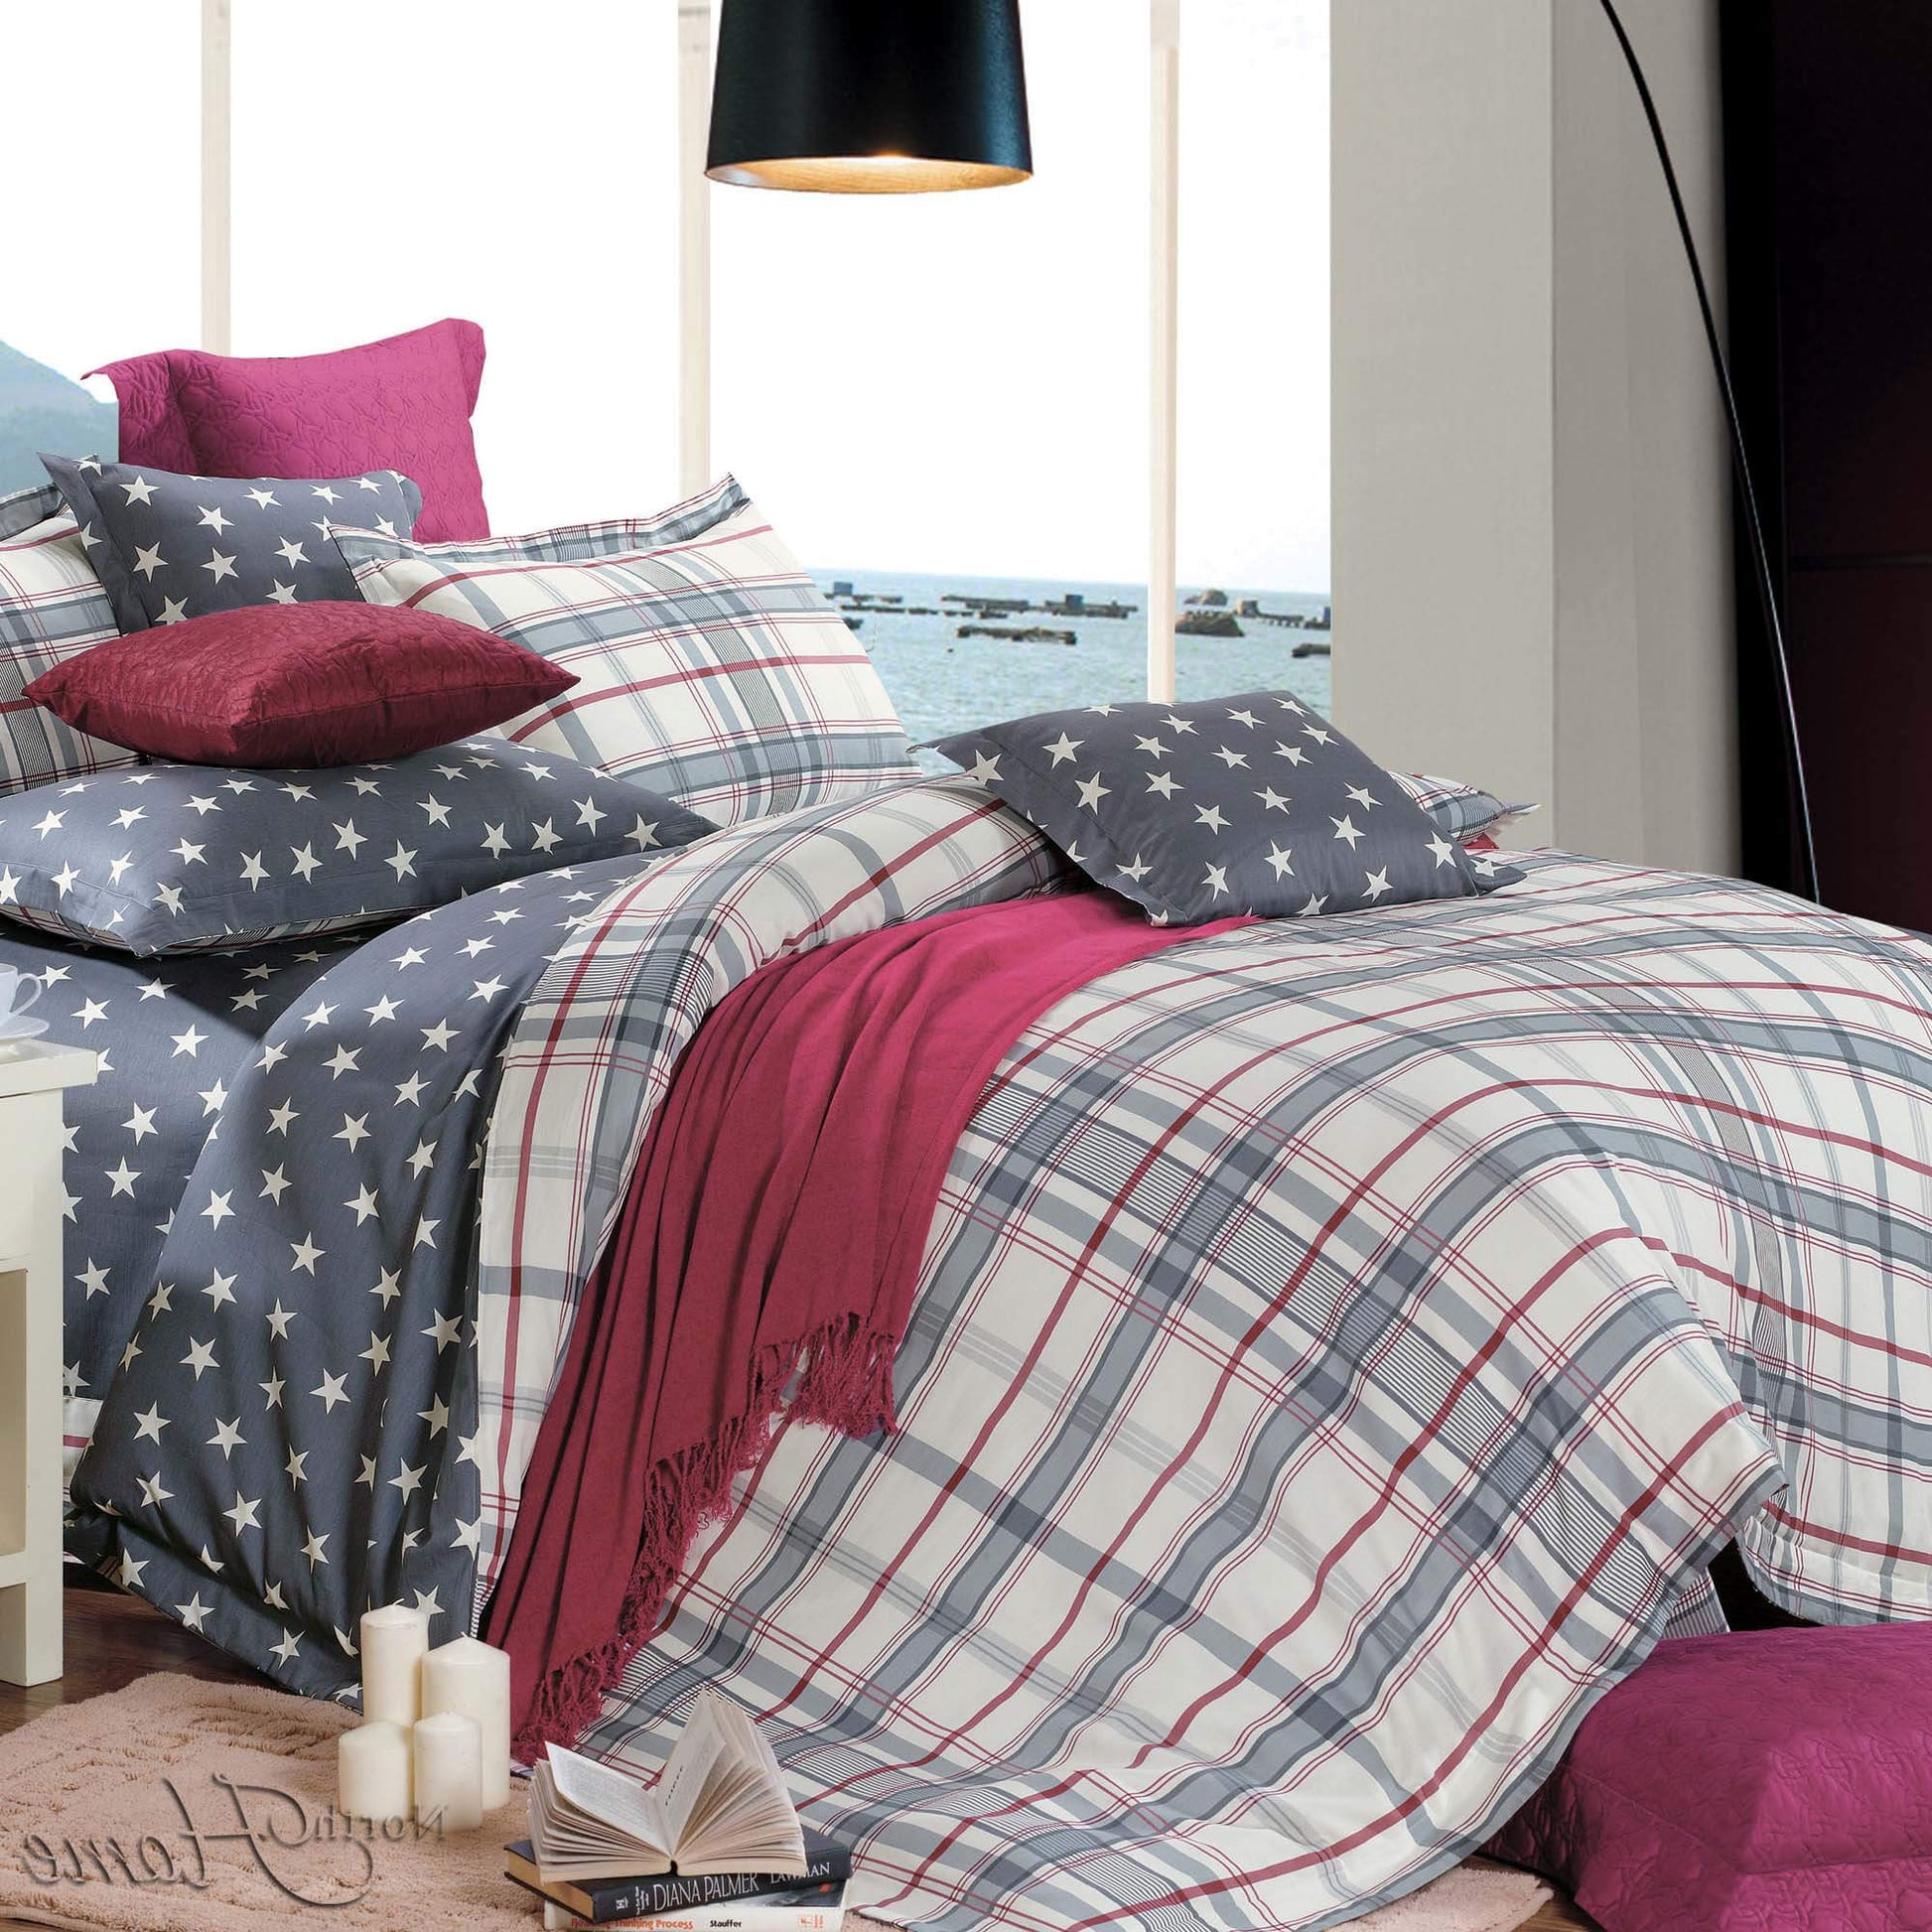 Oxford Duvet Cover Set freeshipping - North Home